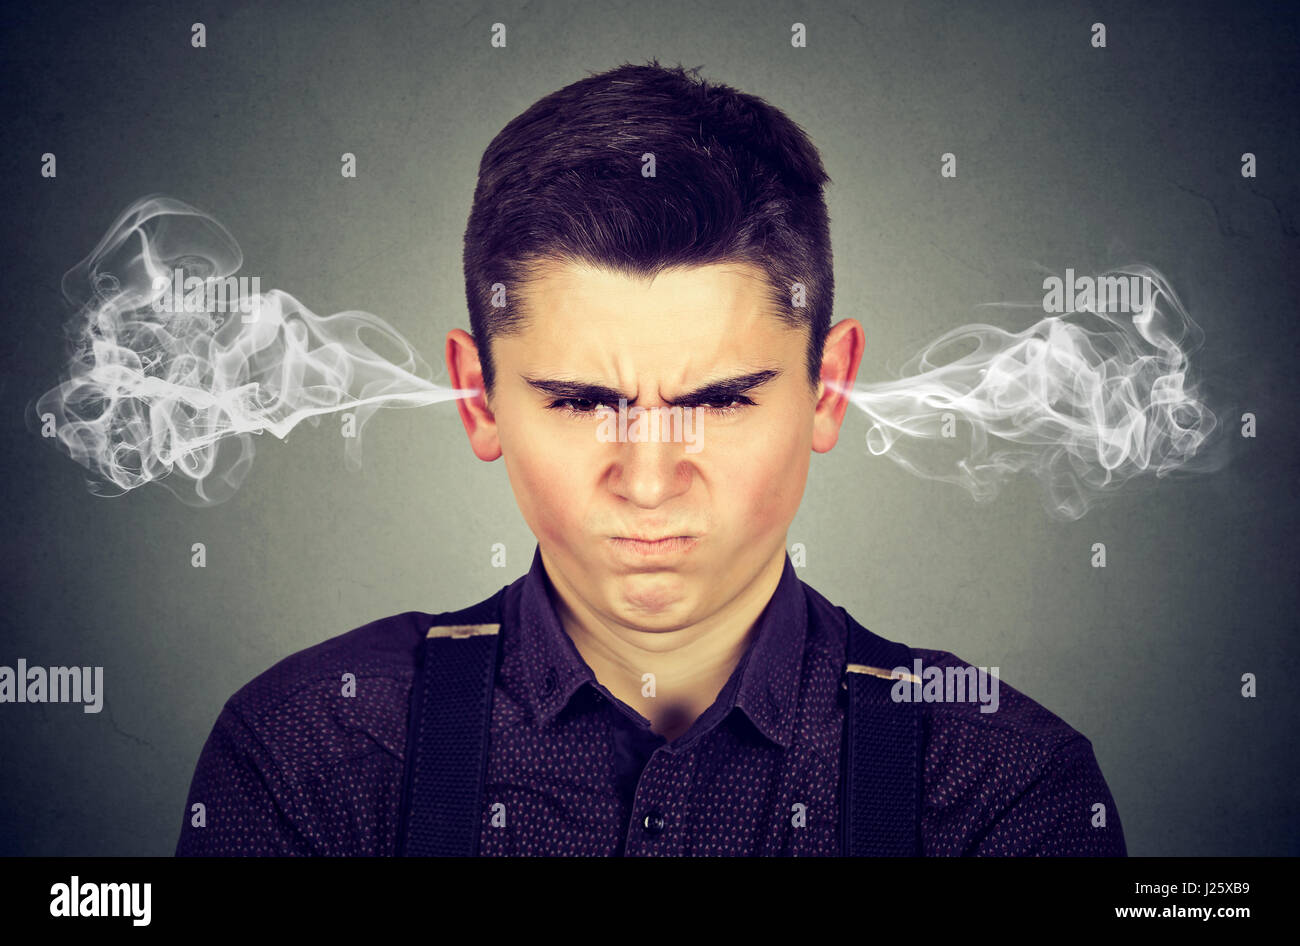 Angry young man, blowing steam coming out of ears, about to have nervous breakdown isolated on gray background. Negative human emotions facial express Stock Photo